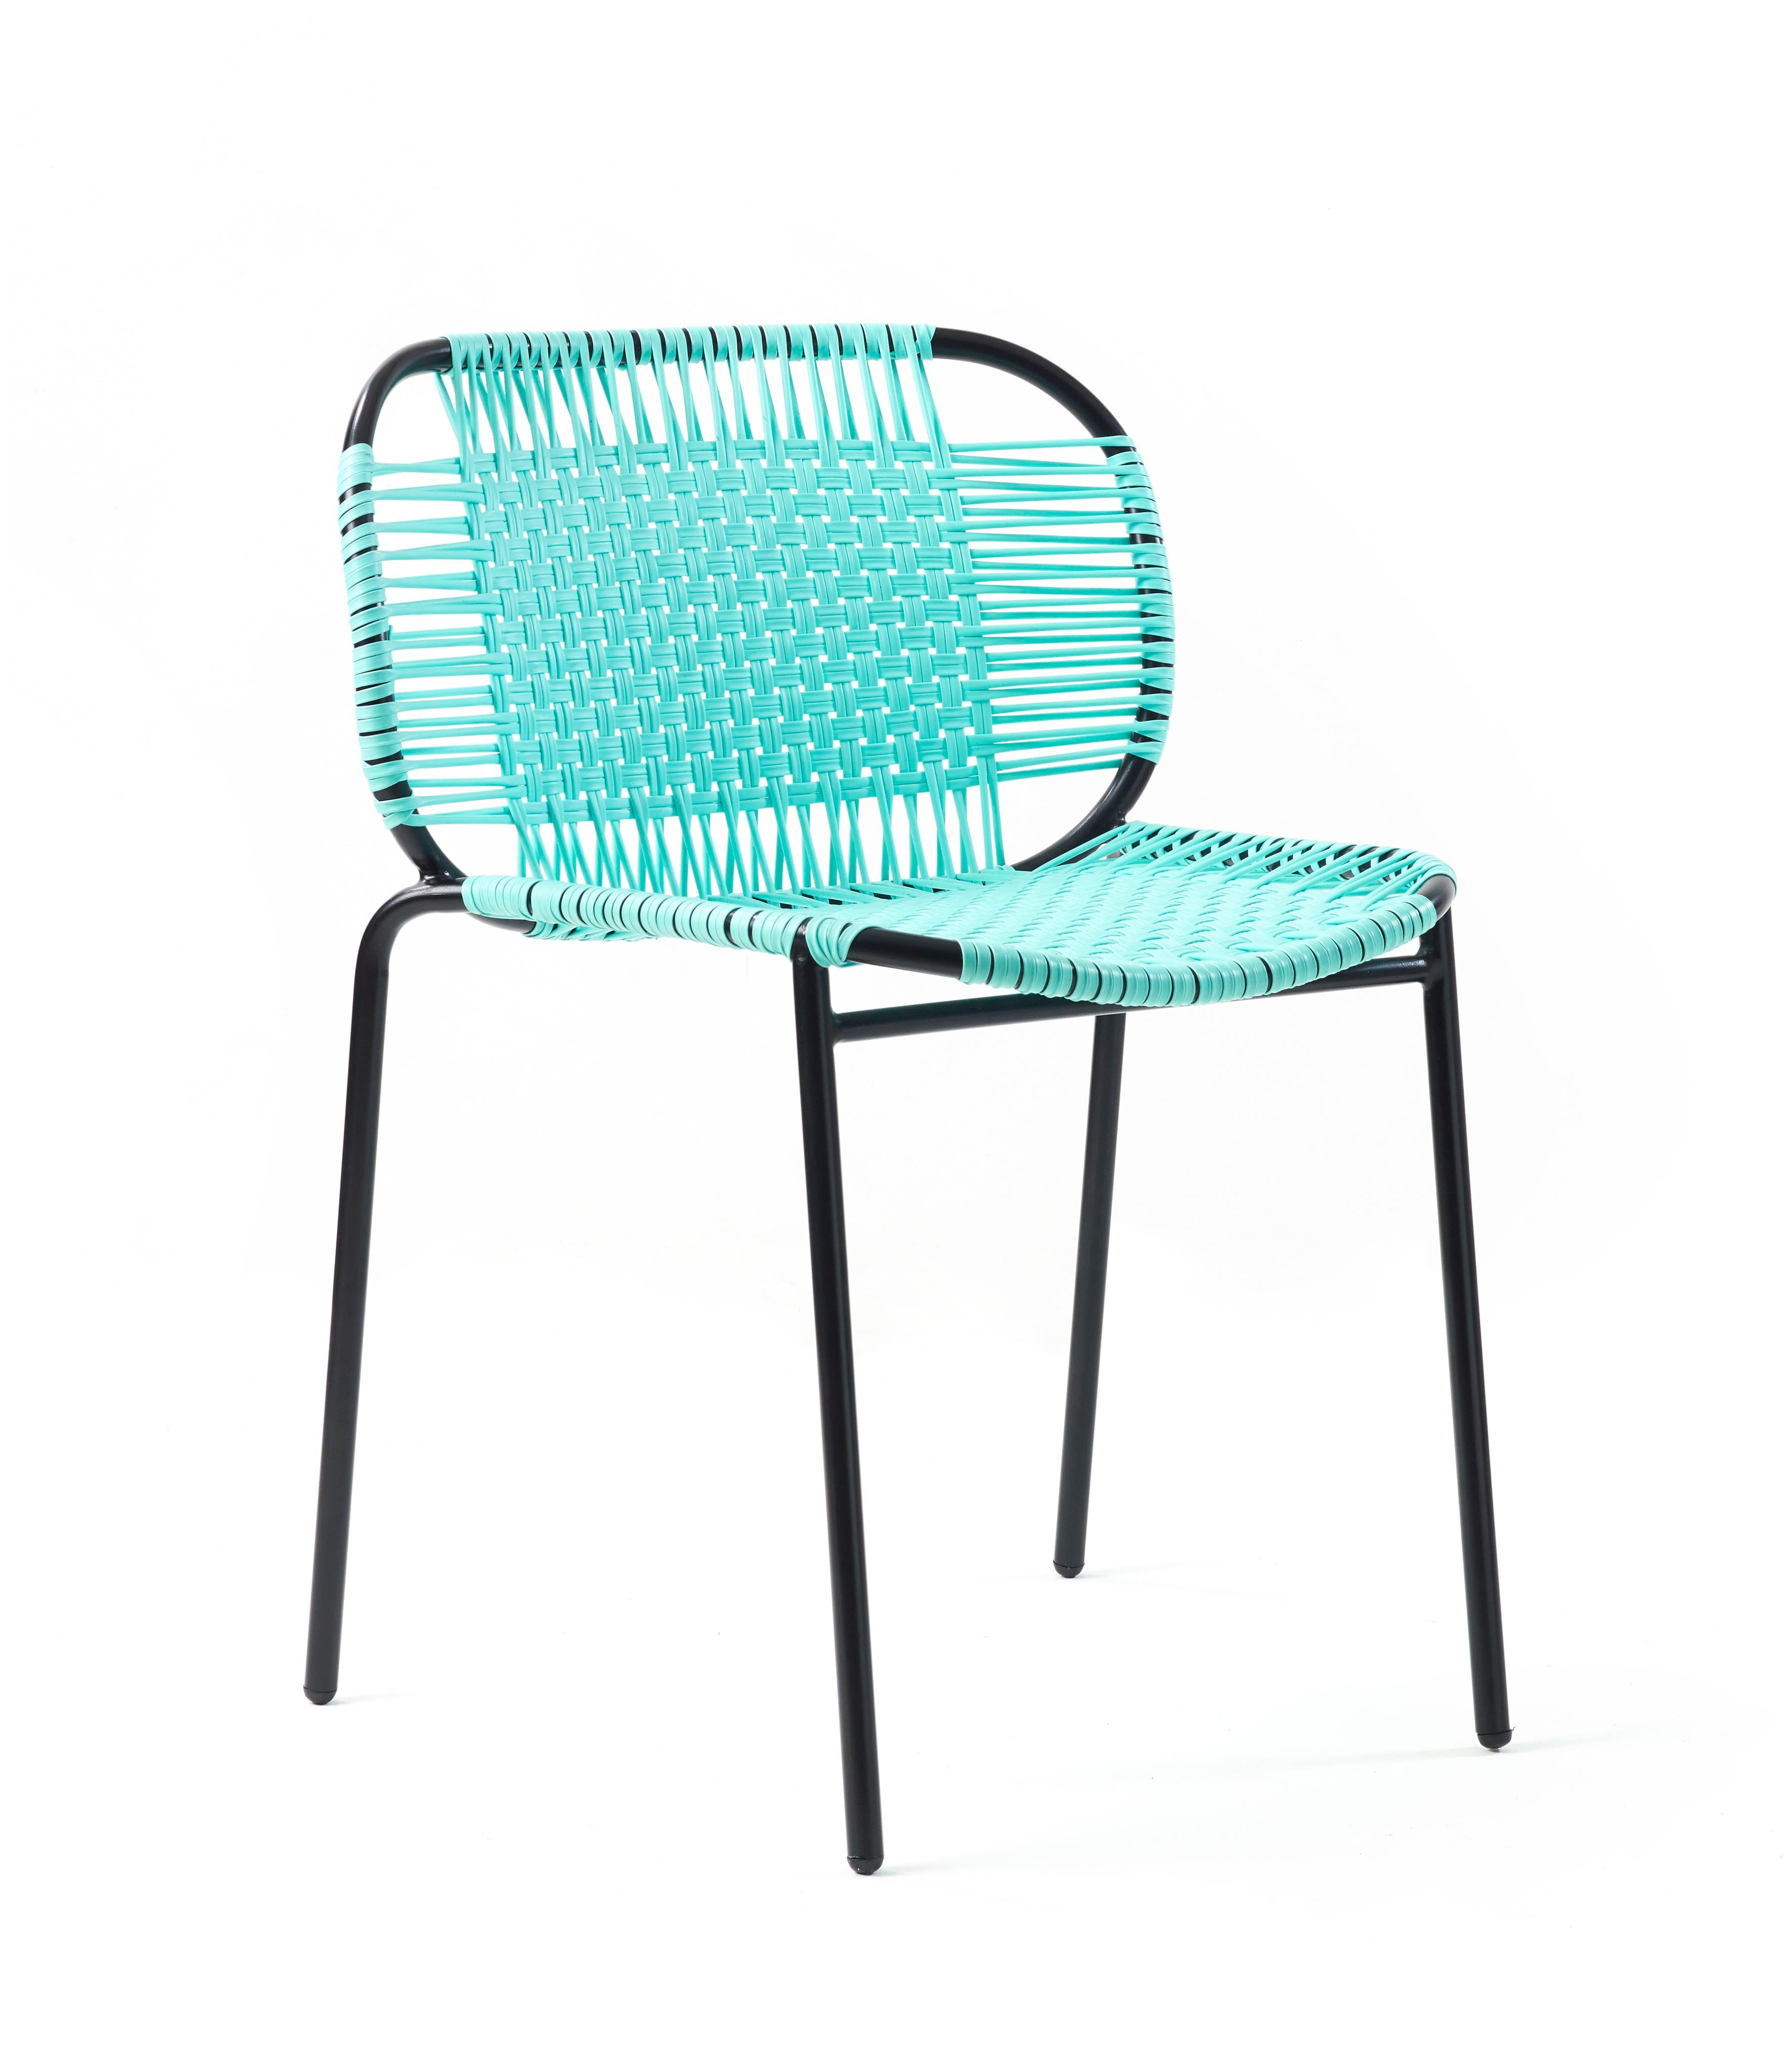 Set of 4 mint cielo stacking chair by Sebastian Herkner.
Materials: PVC strings, powder-coated steel frame.
Technique: made from recycled plastic and weaved by local craftspeople in cartagena, colombia.
Dimensions: W 56 x D 51.4 x H 78 cm
Also